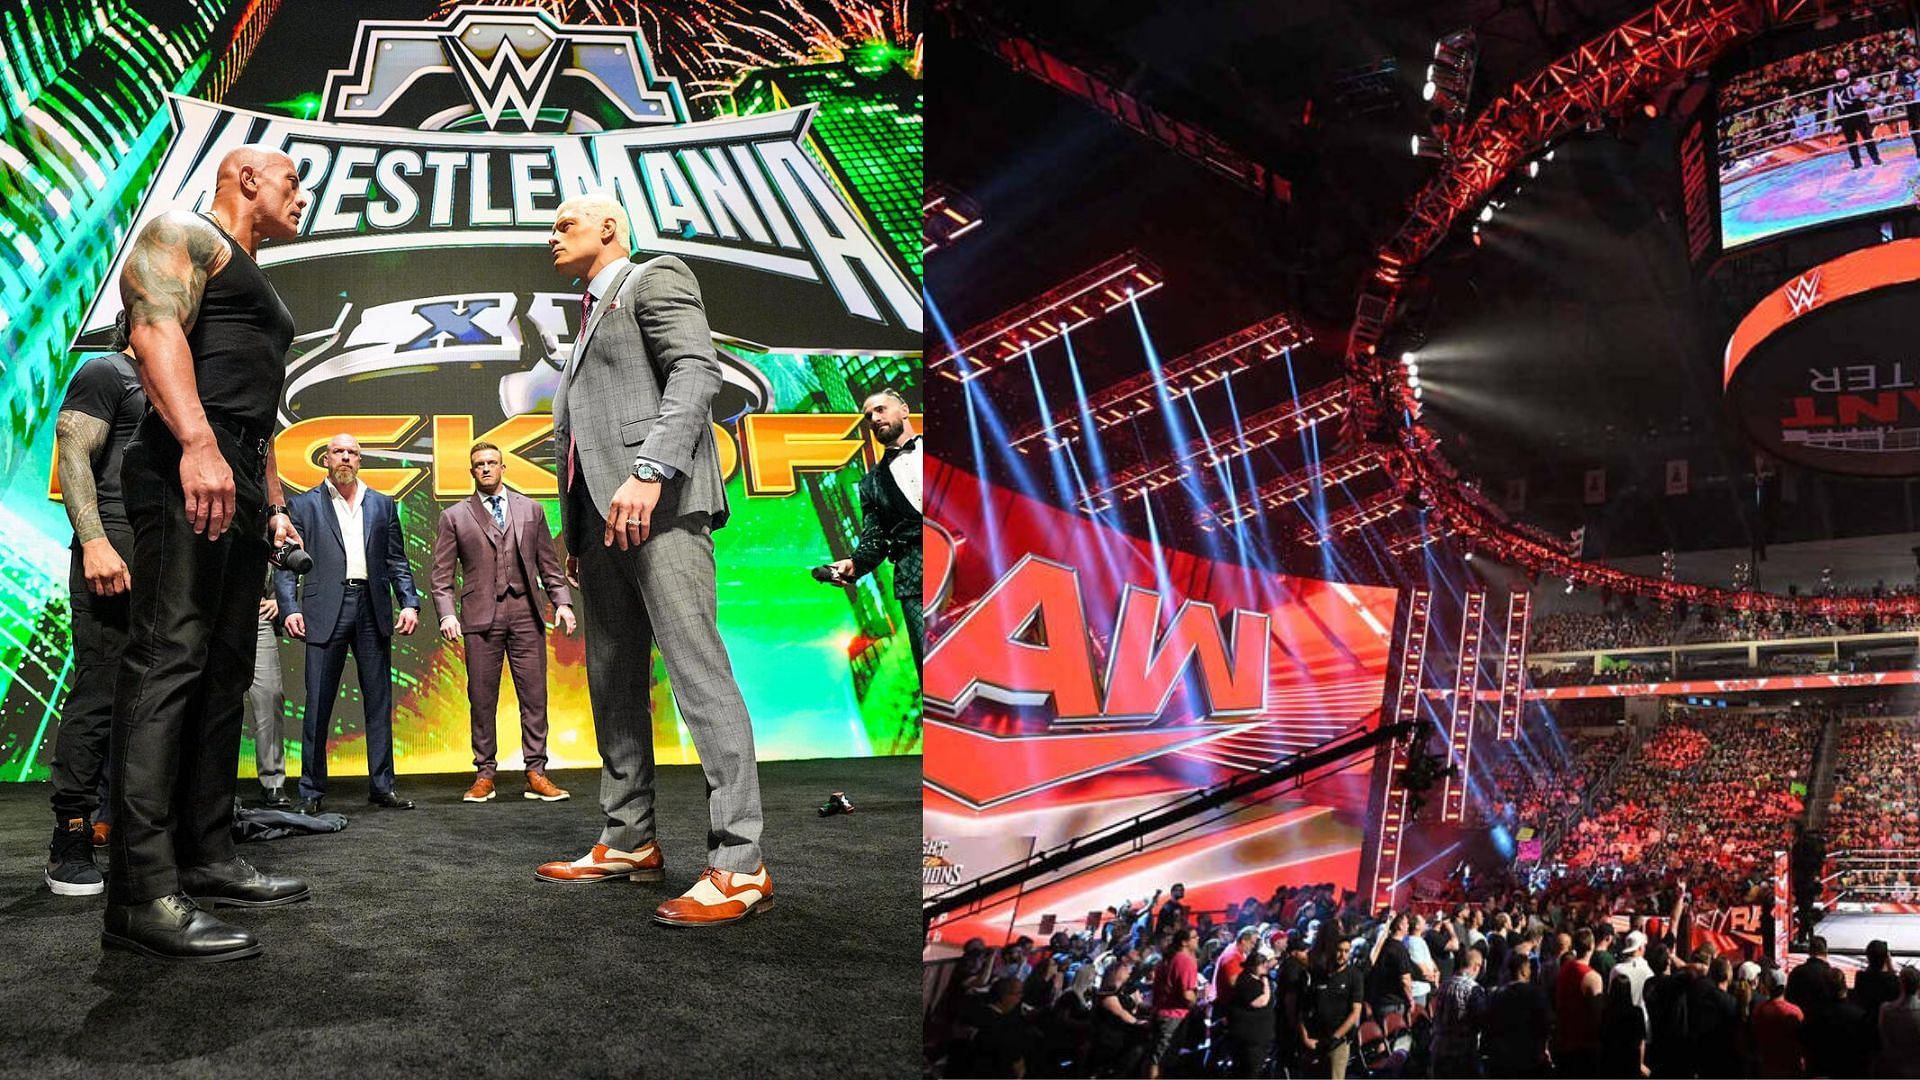 WWE RAW this week was live from the Allstate Arena, Chicago